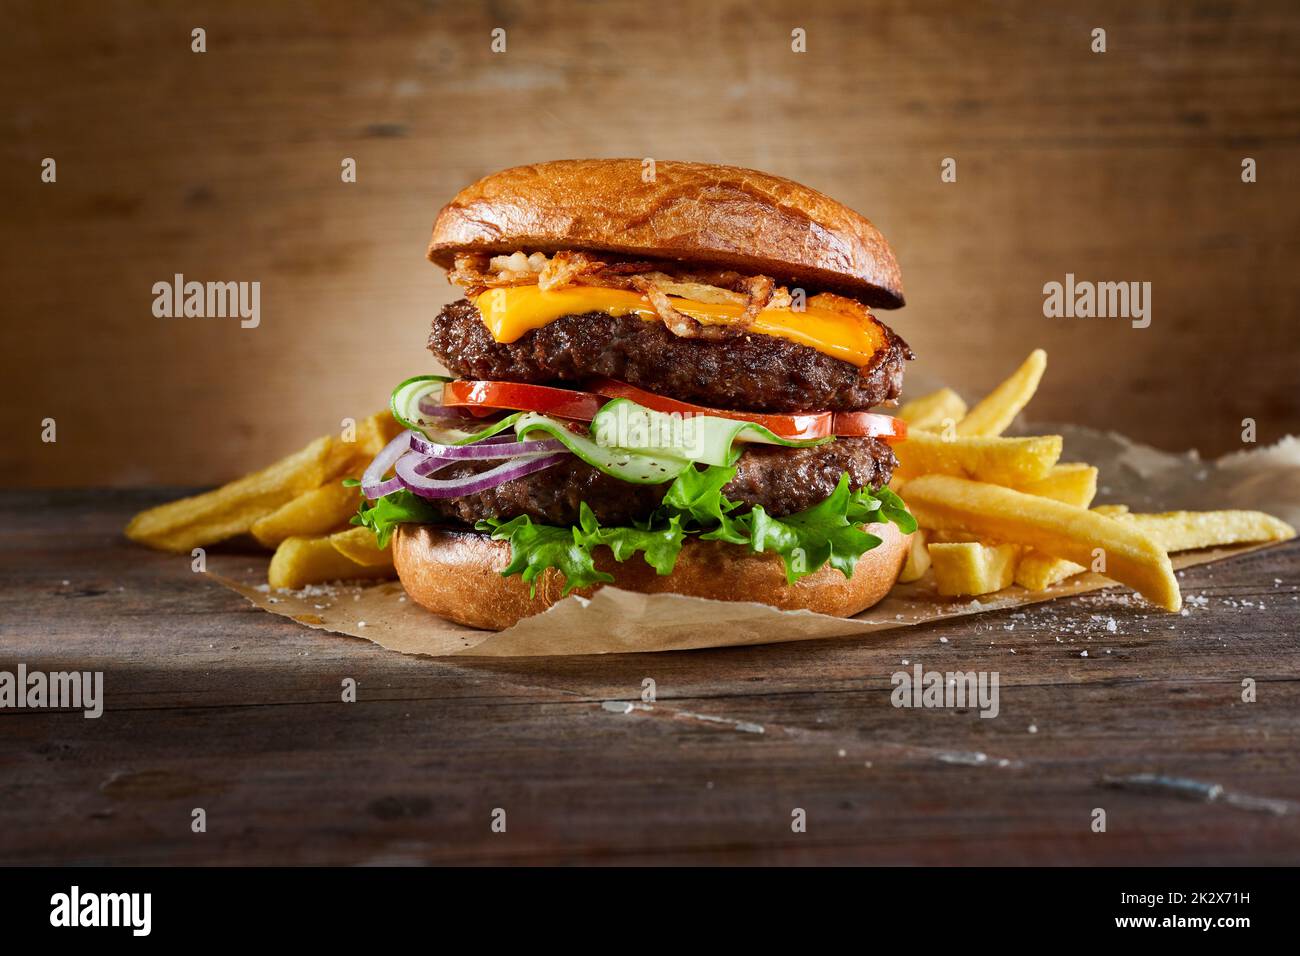 Double burger with fries on table Stock Photo